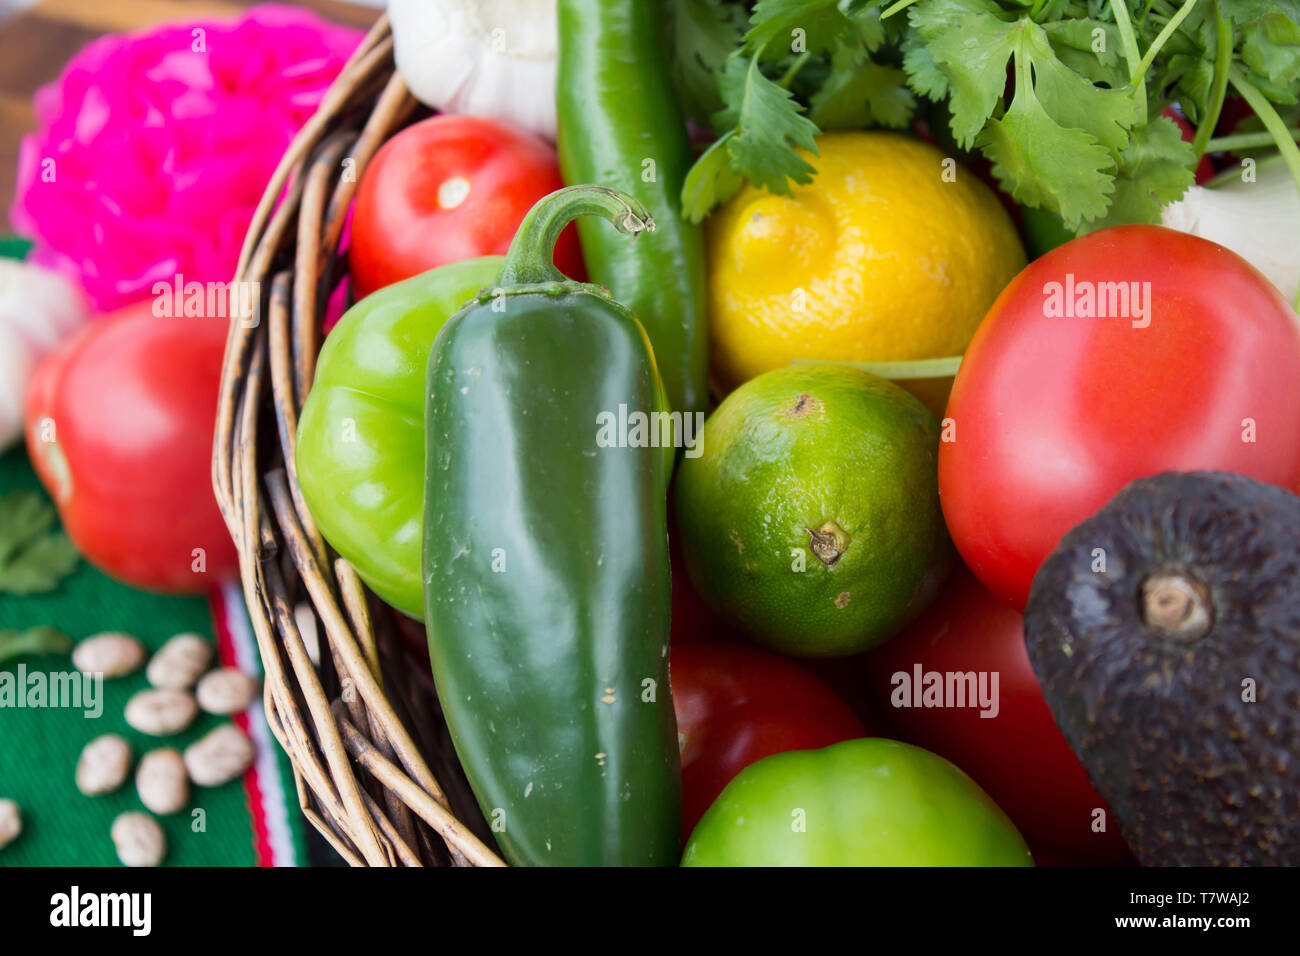 Close-up of wicker basket with fresh colorful ingredients for salsa on green sarape/Mexican blanket Stock Photo